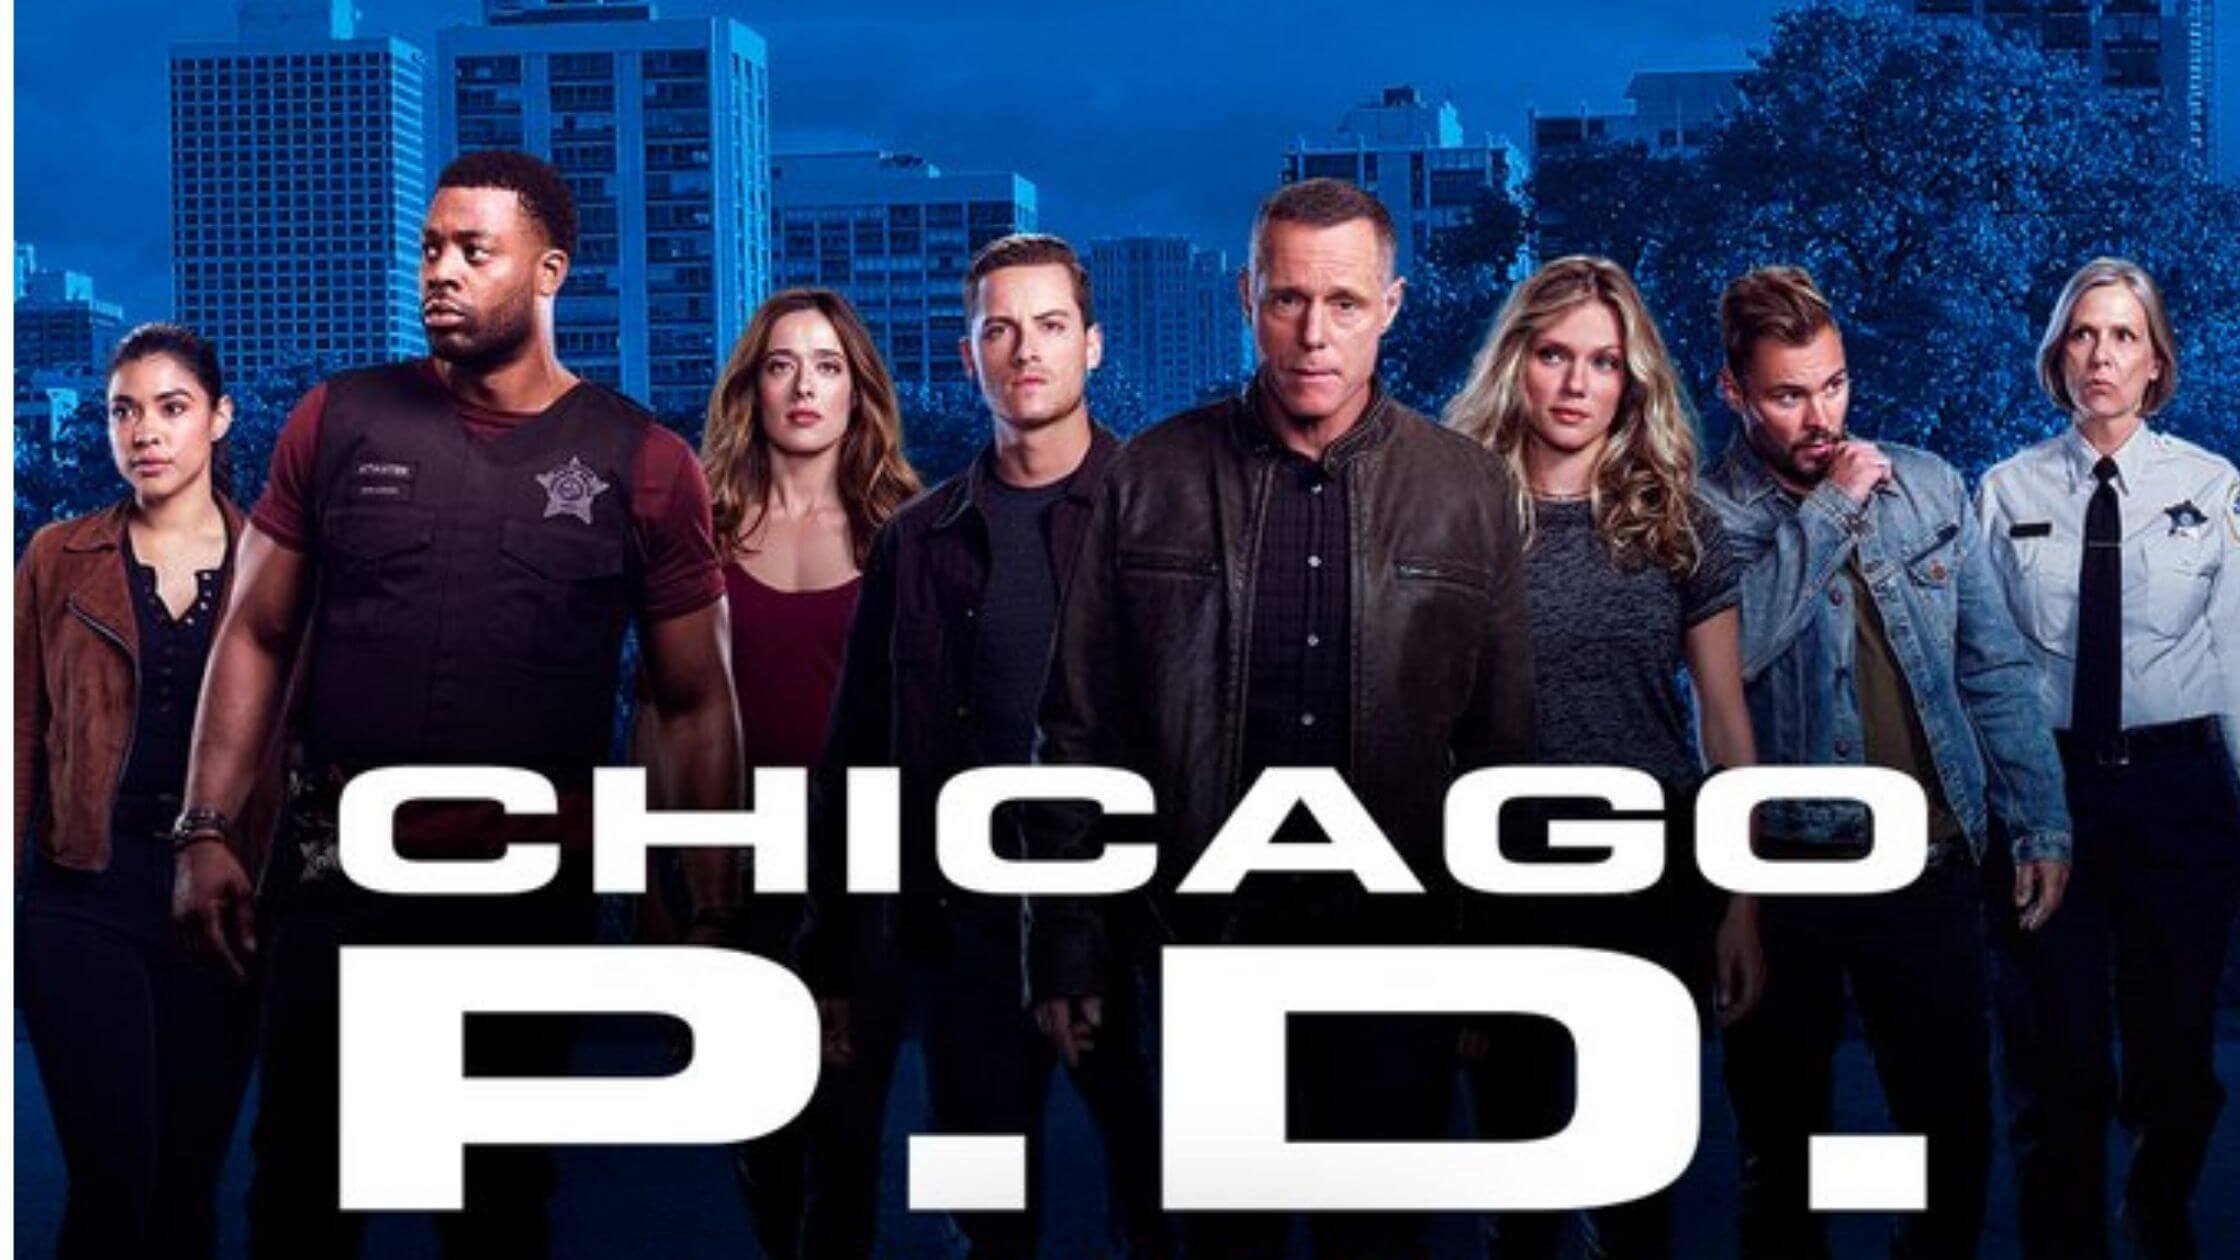 Chicago P D Season 9 Episode 21 Release Date And Time, Countdown!